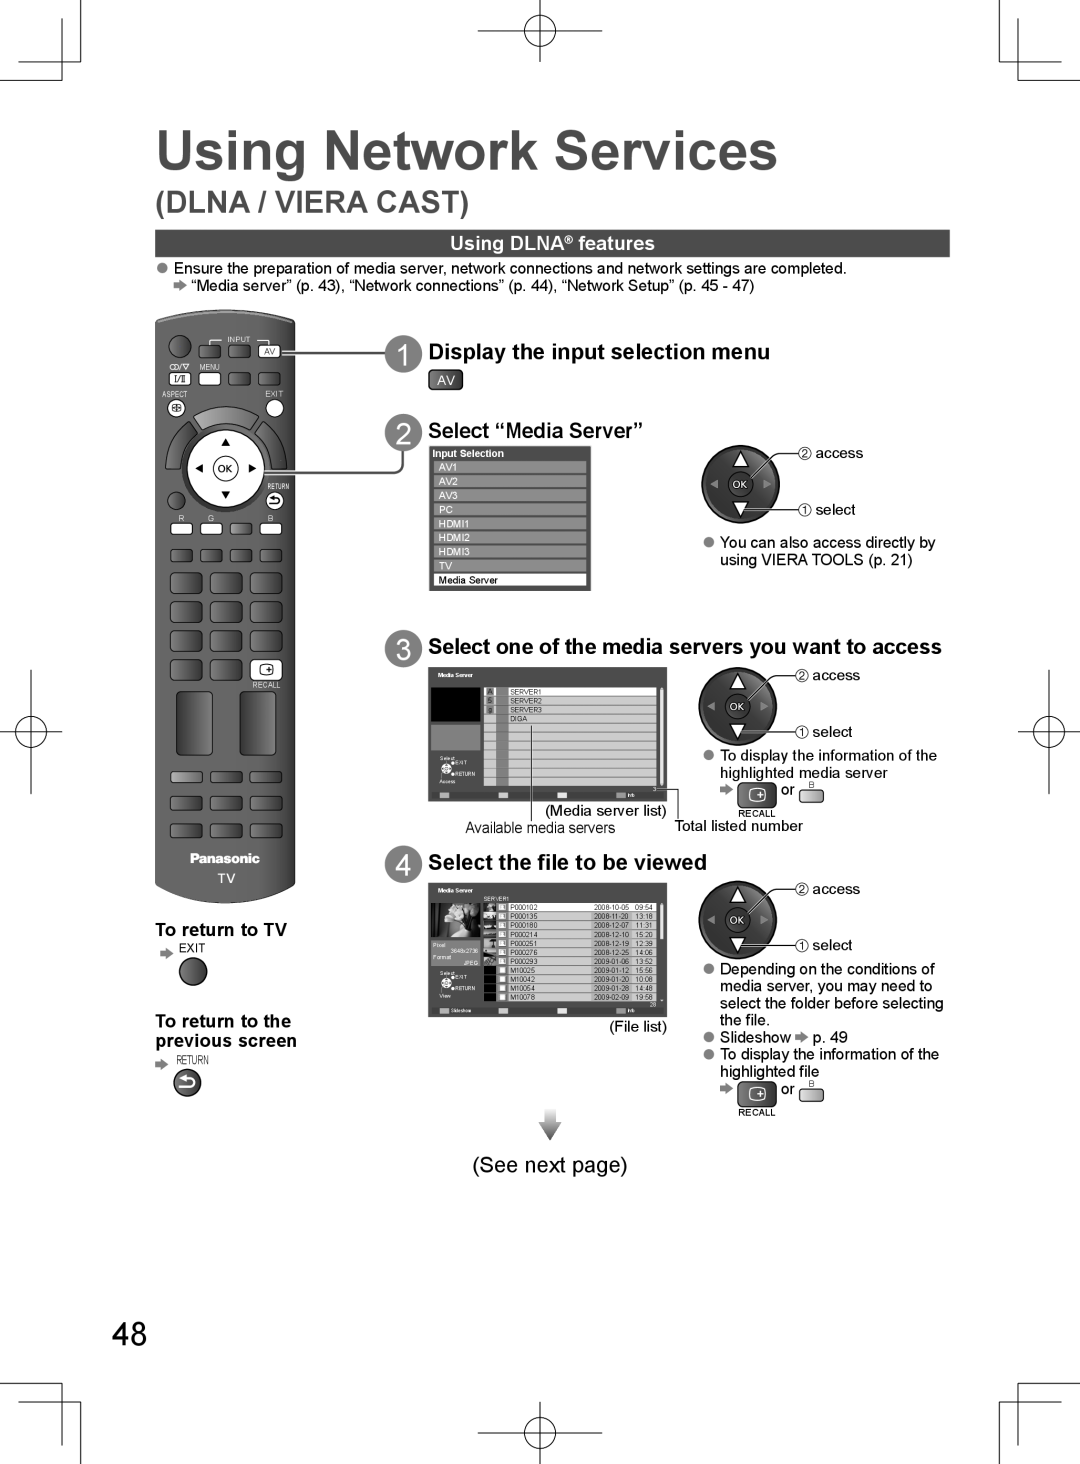 Panasonic TH-L32D25M Display the input selection menu, Select “Media Server”, Select the file to be viewed, See next page 